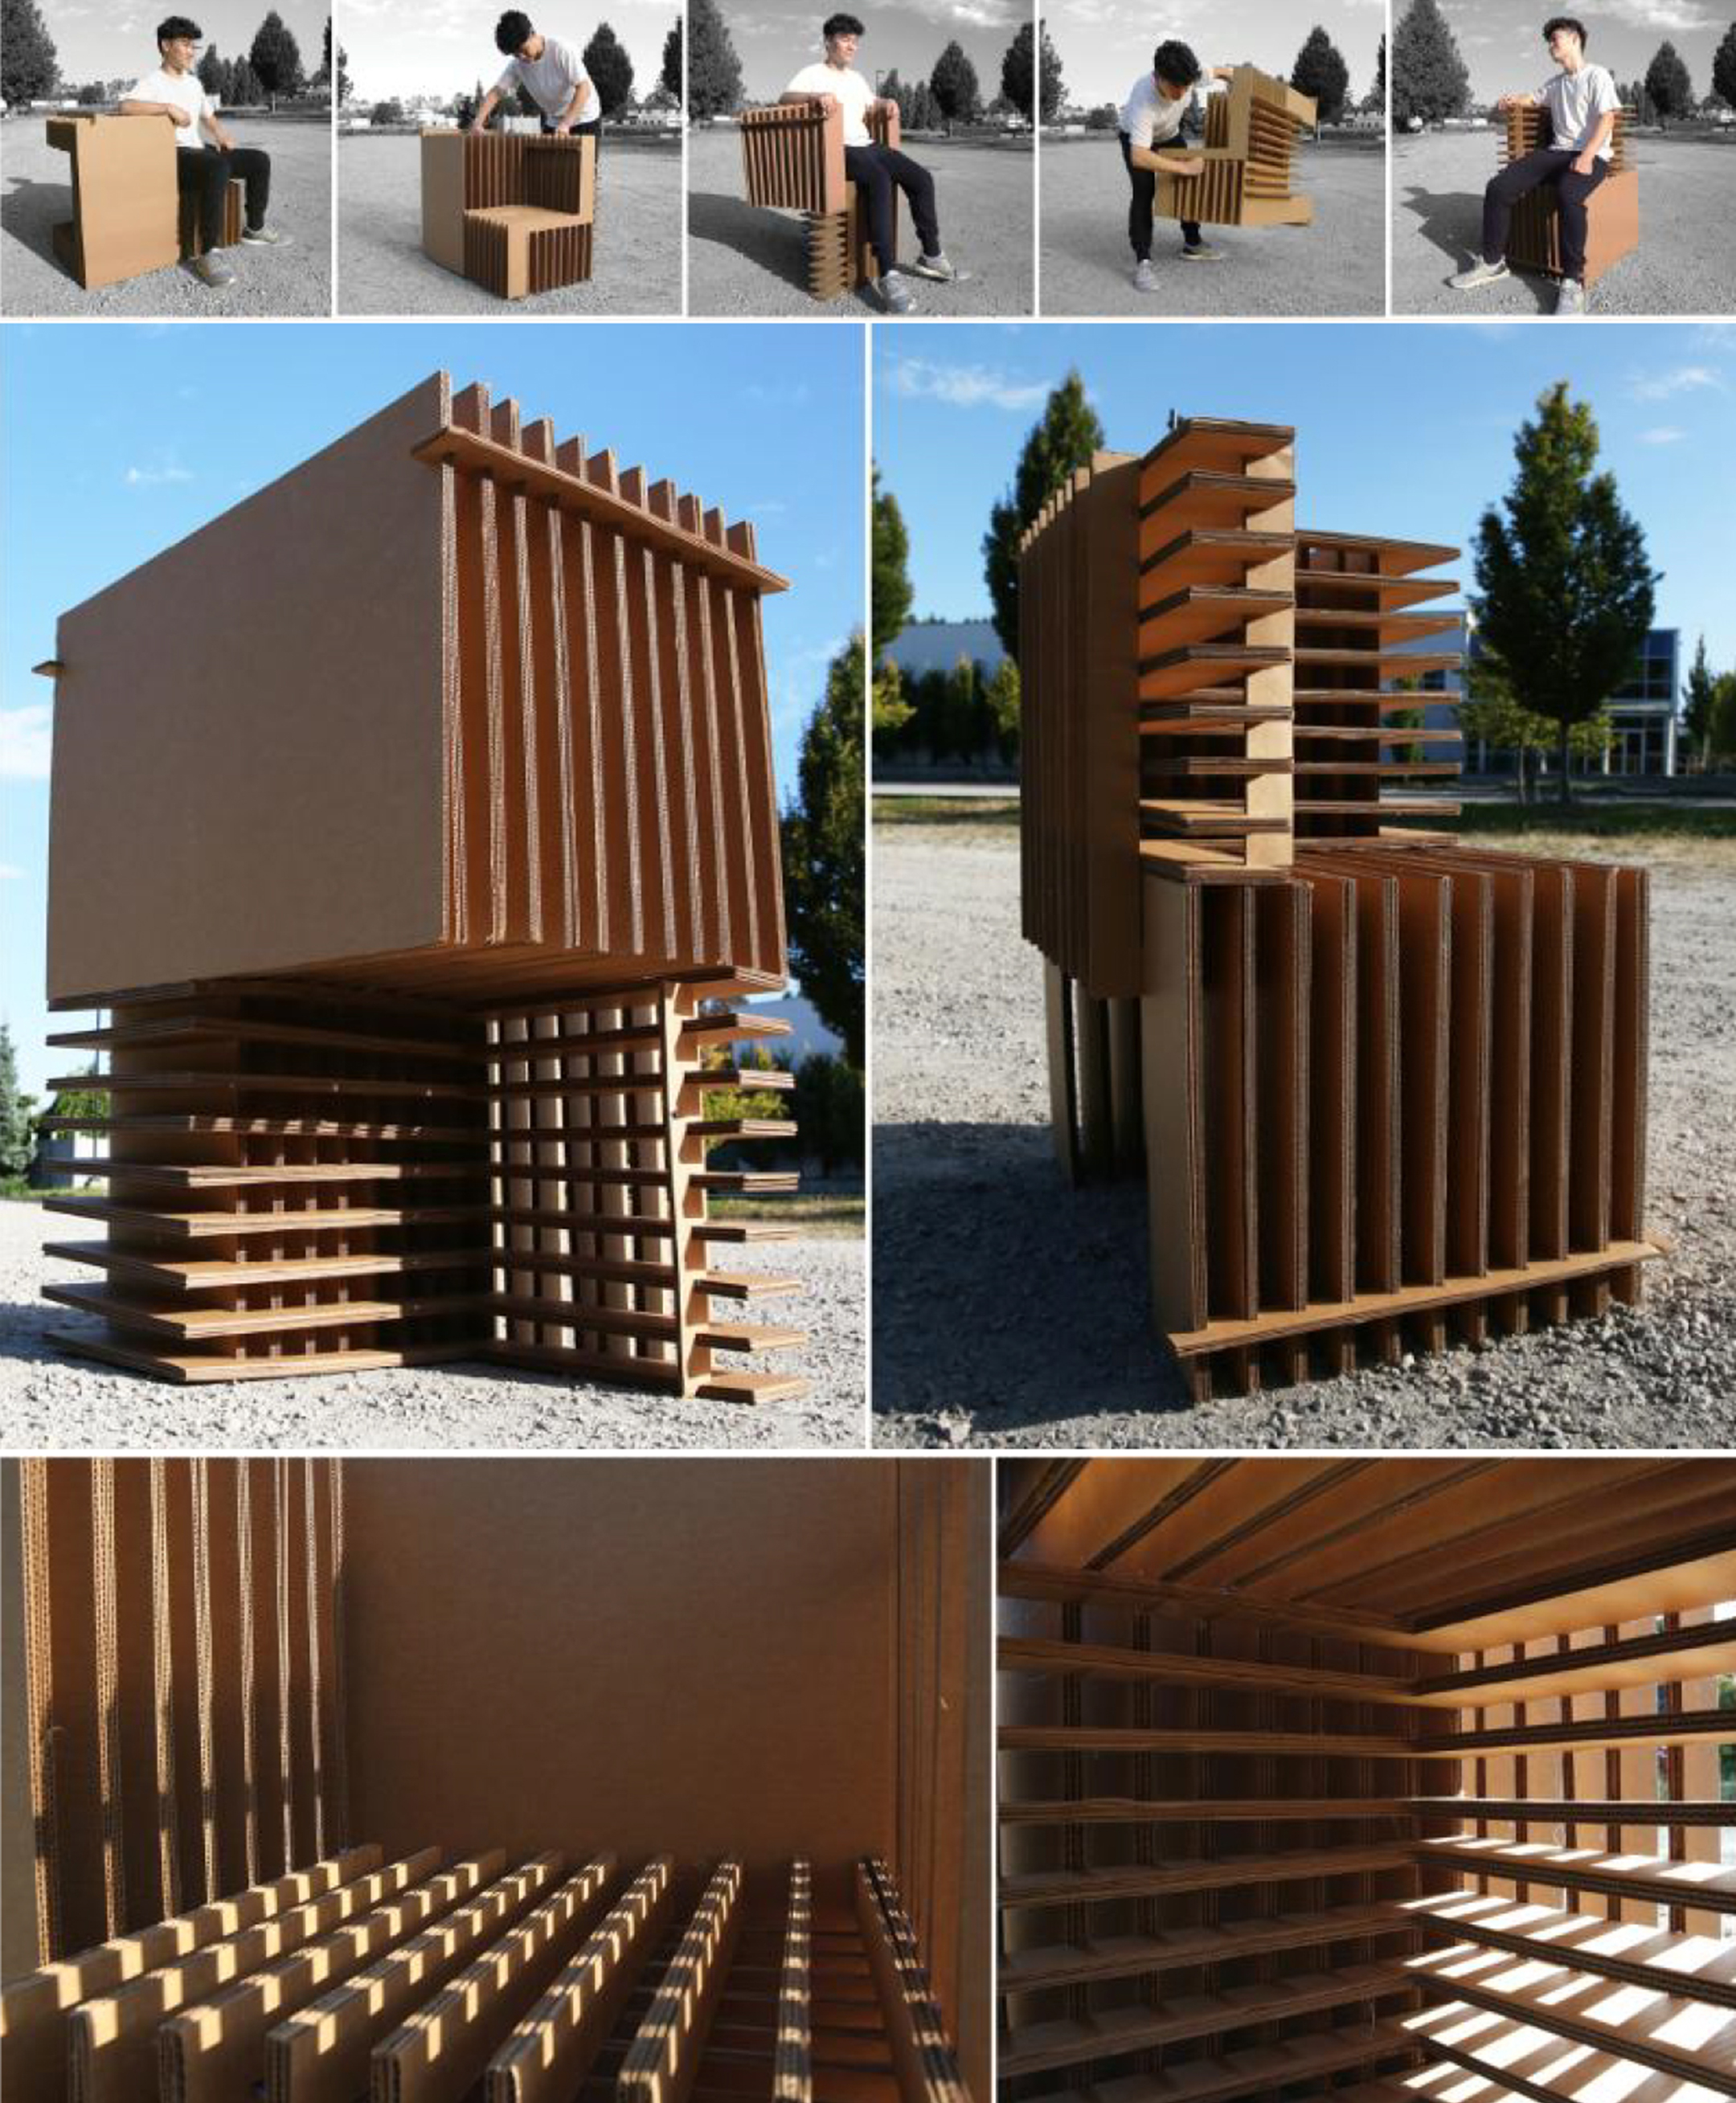 Series of photos of a chair made from corrugated cardboard